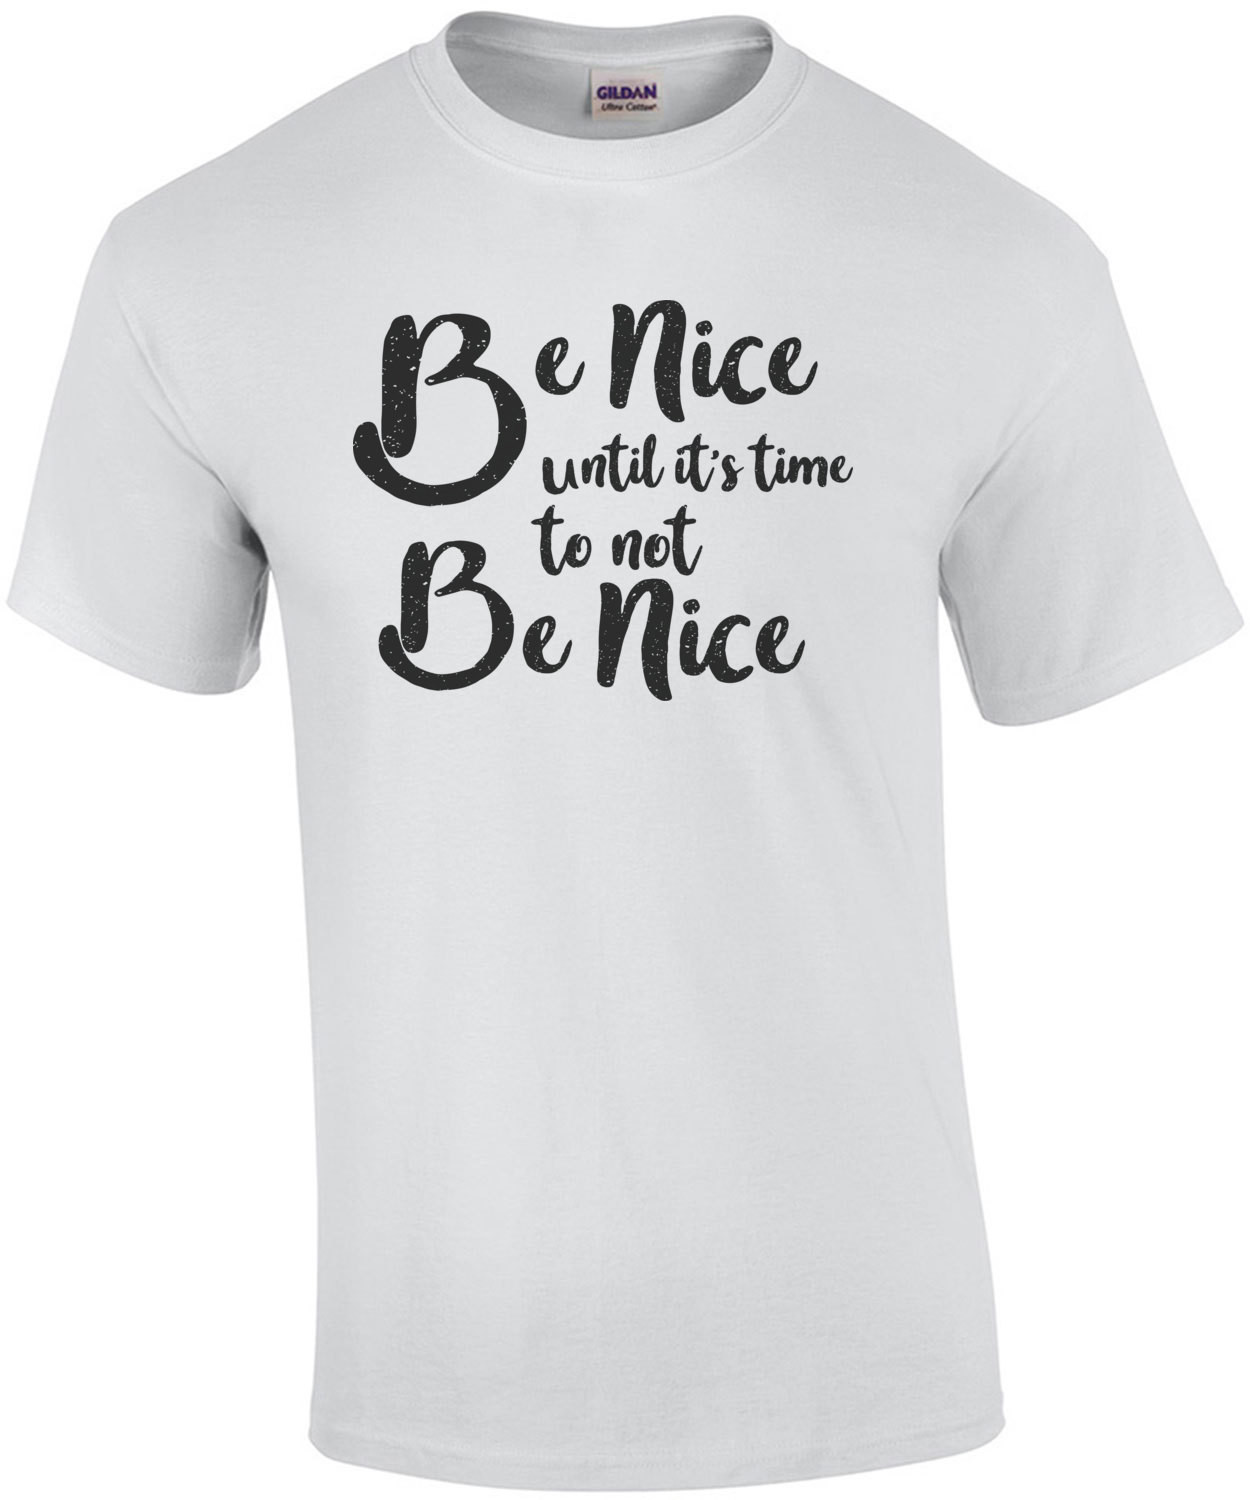 Be Nice until it's time to not be nice. Patrick Swayze - Dalton - Roadhouse T-Shirt